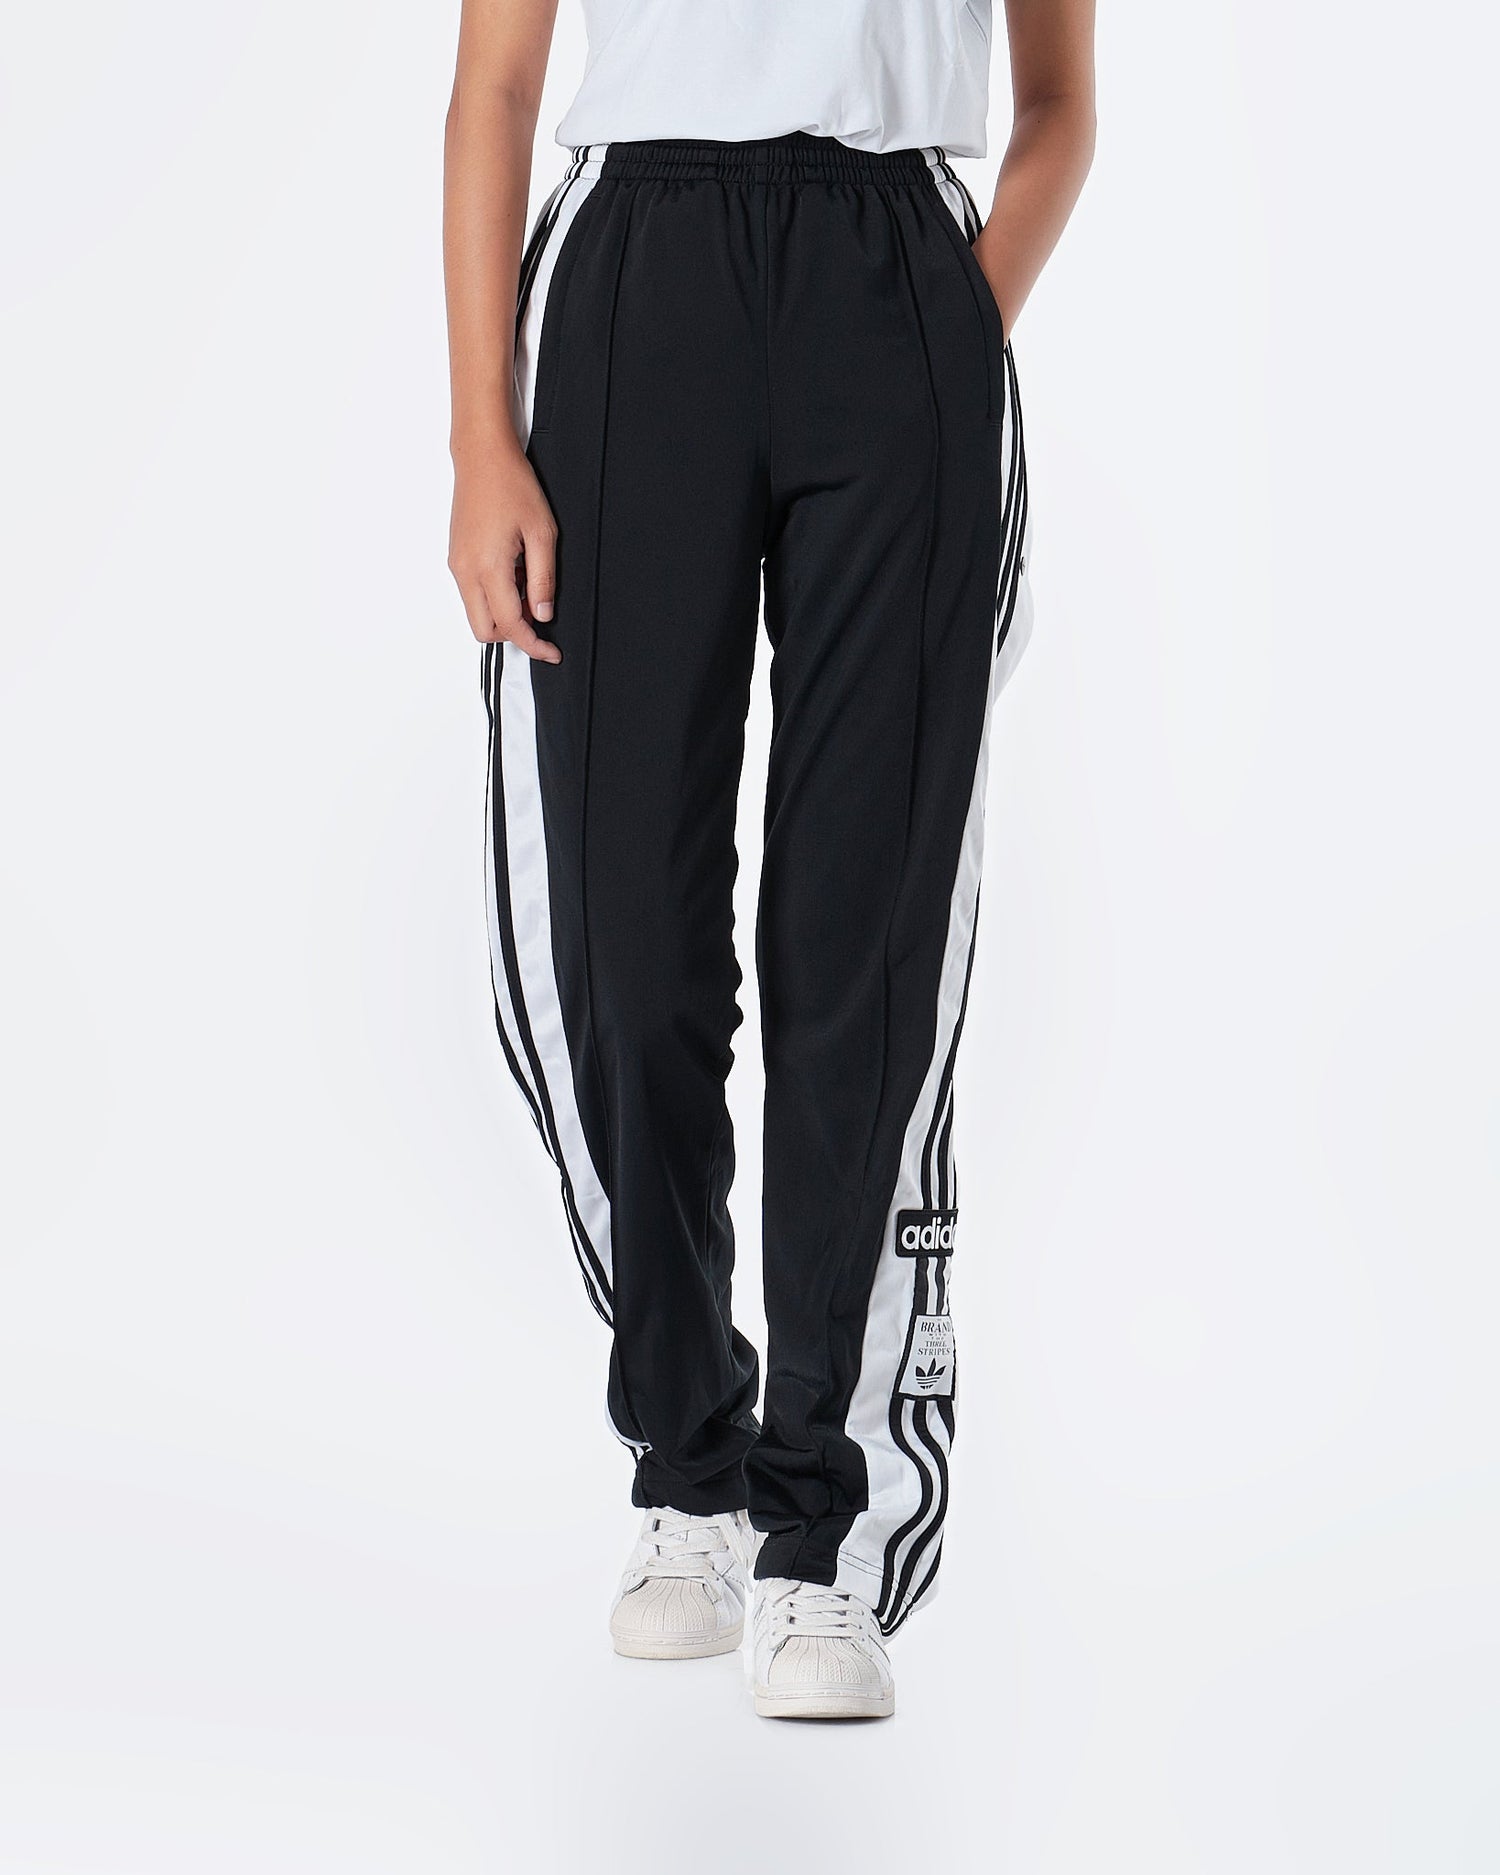 Classic Adibreak Lady Track Pants 34.90 - MOI OUTFIT